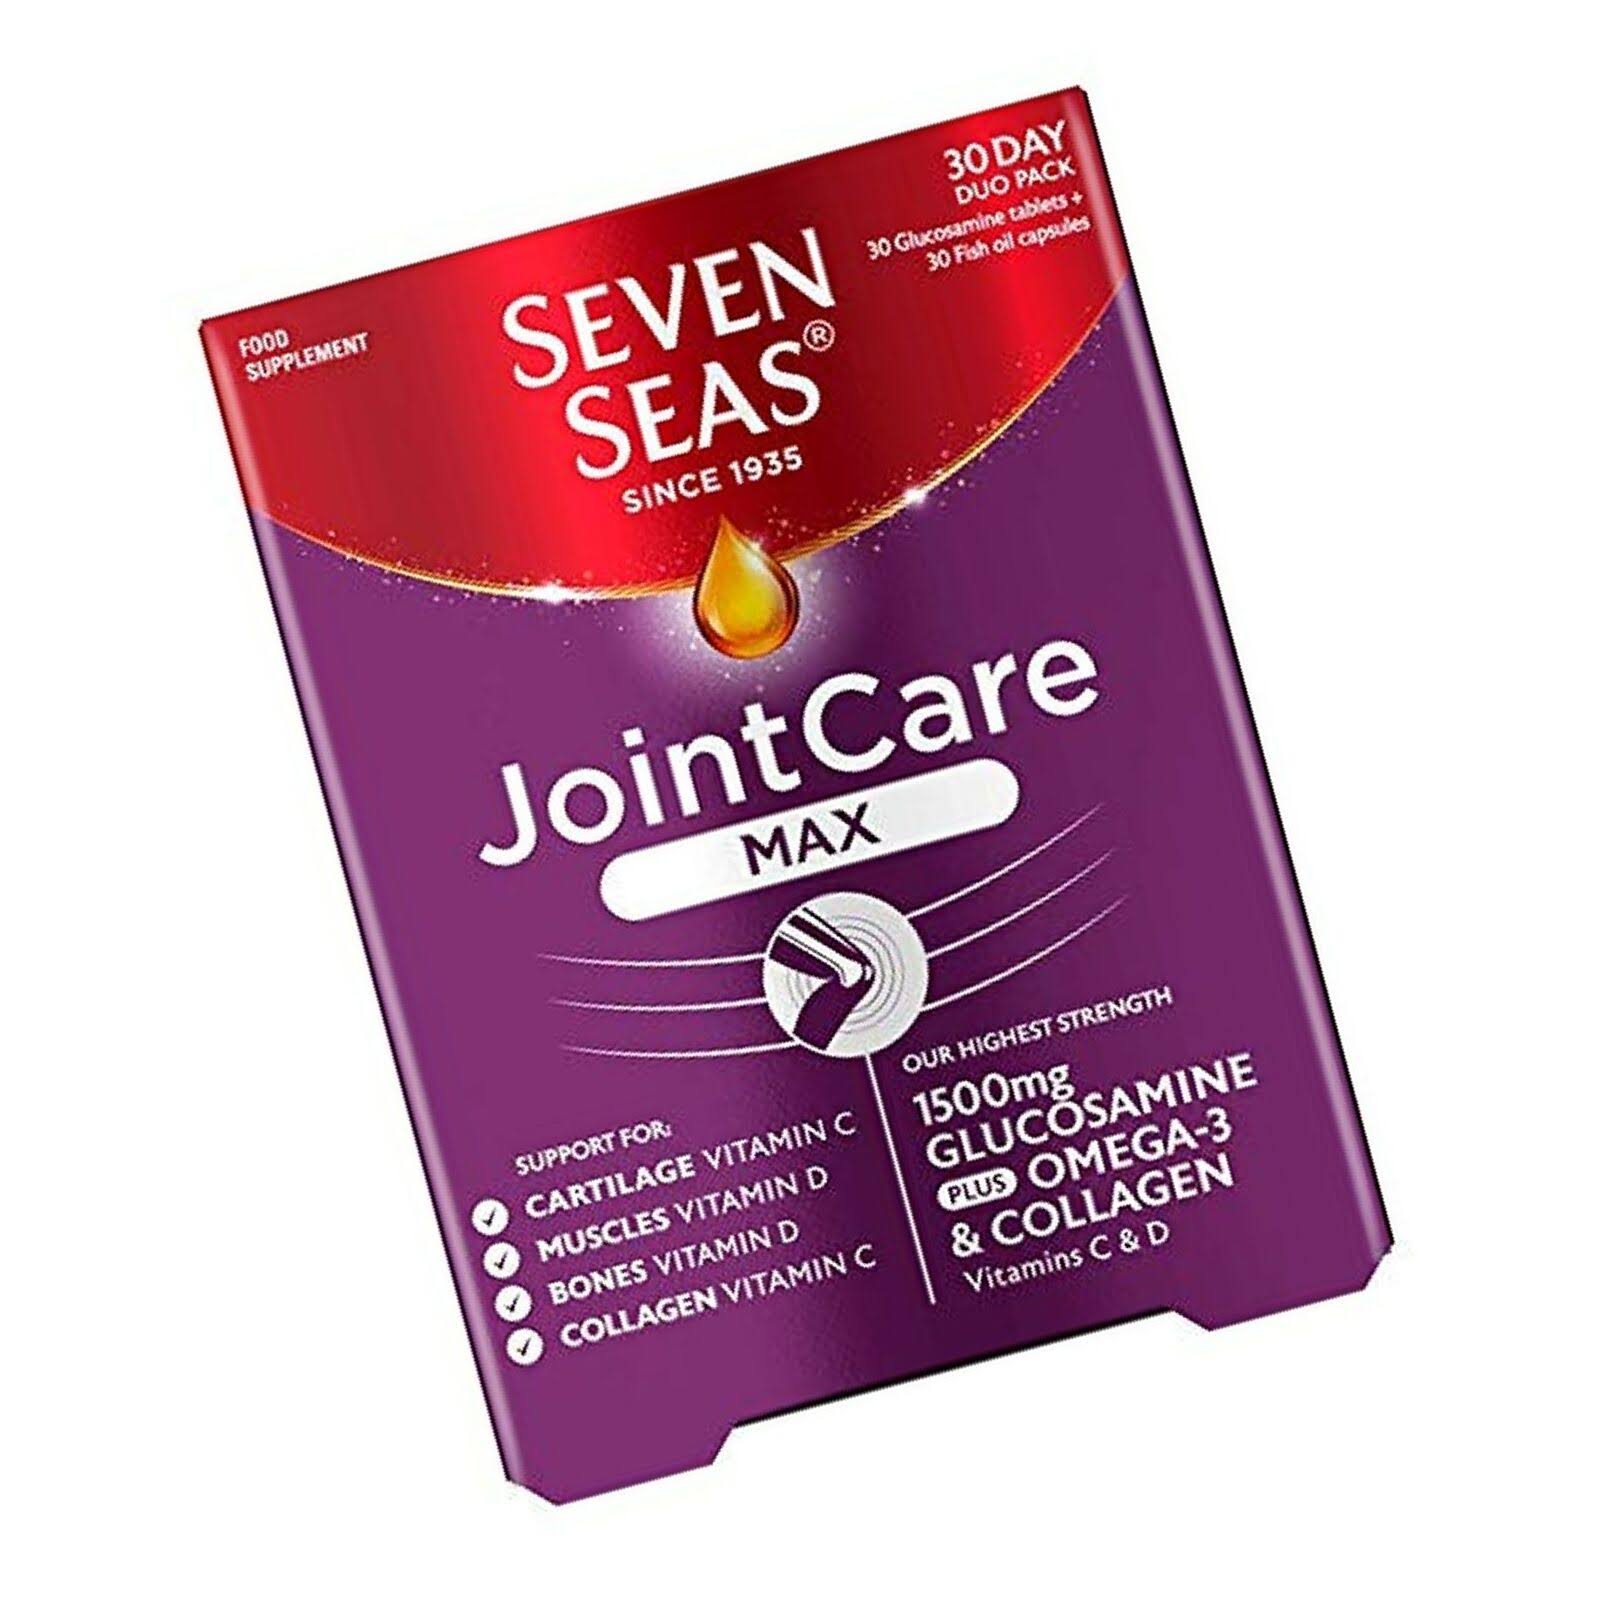 Seven Seas Joint Care Max Supplements - 30ct